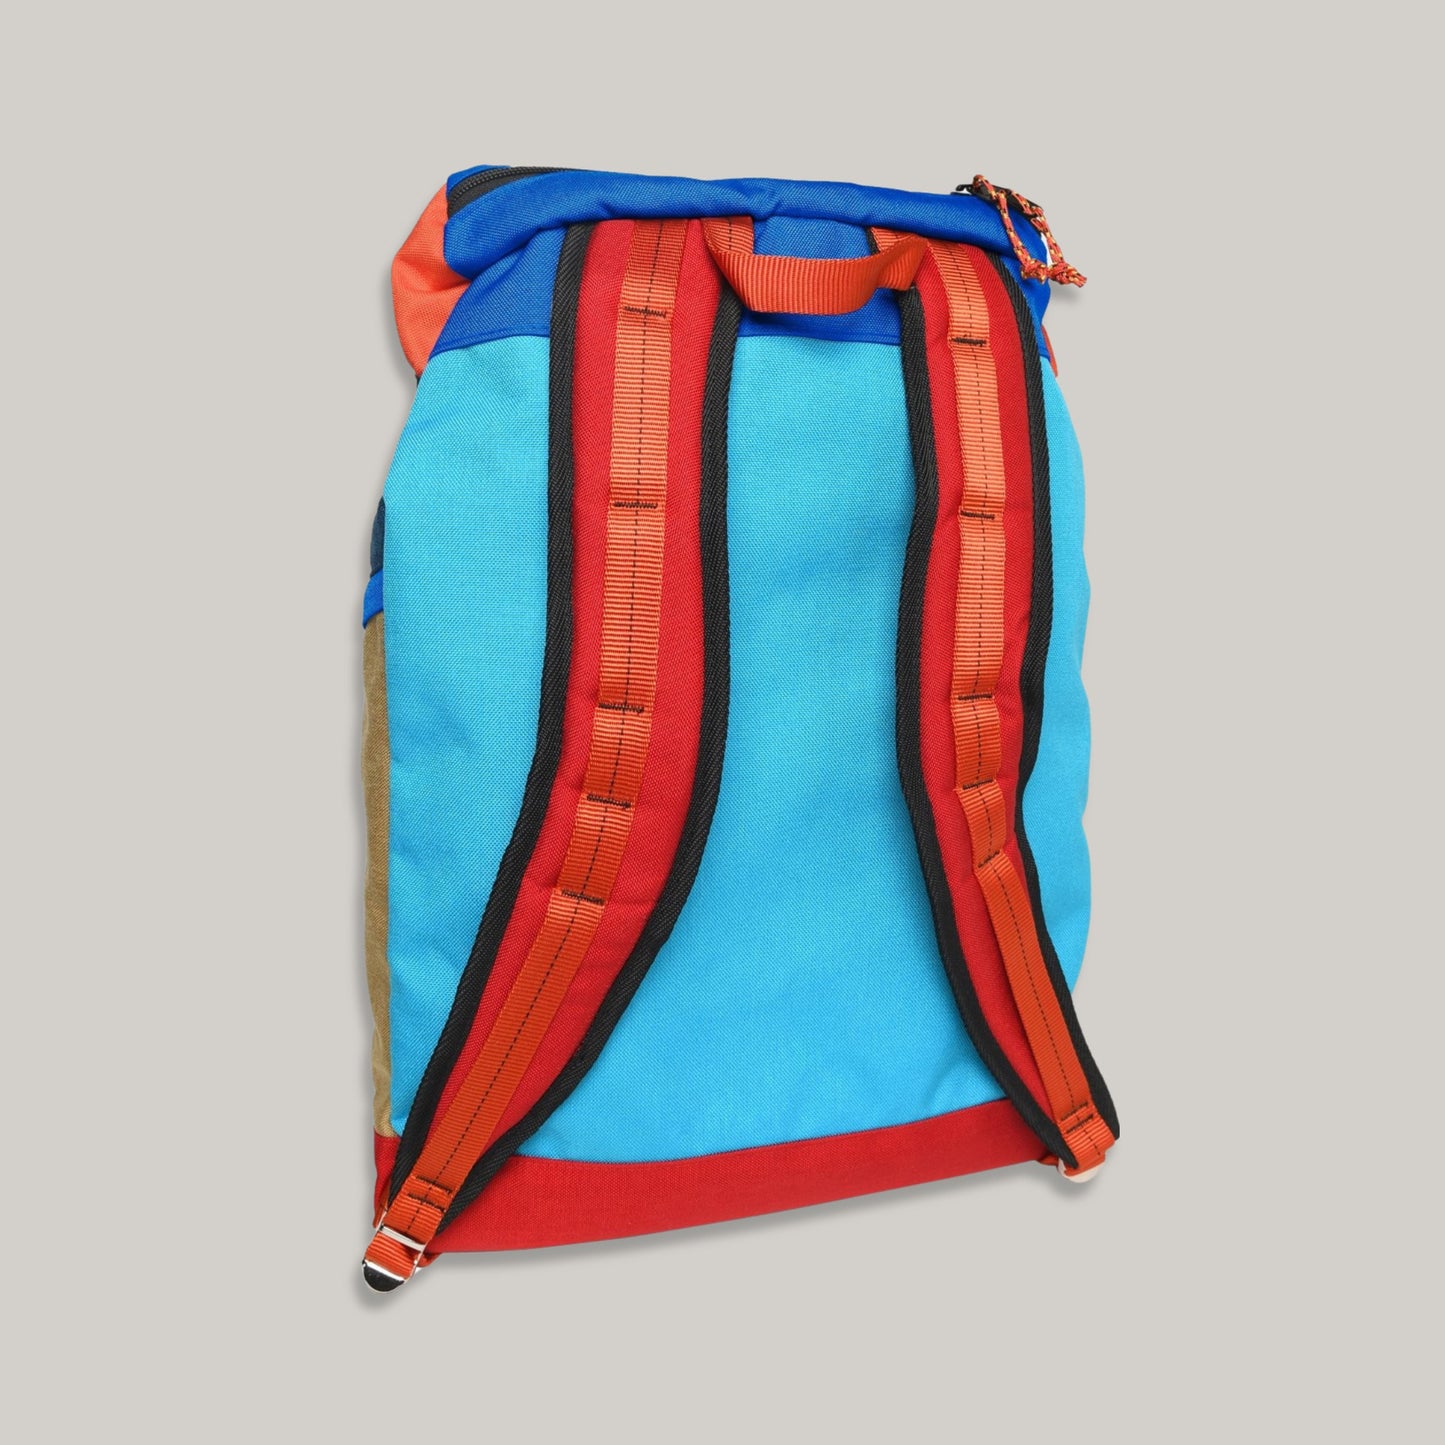 EPPERSON MOUNTANEERING LARGE CLIMB PACK - NEW ROYAL/ TURQUOISE